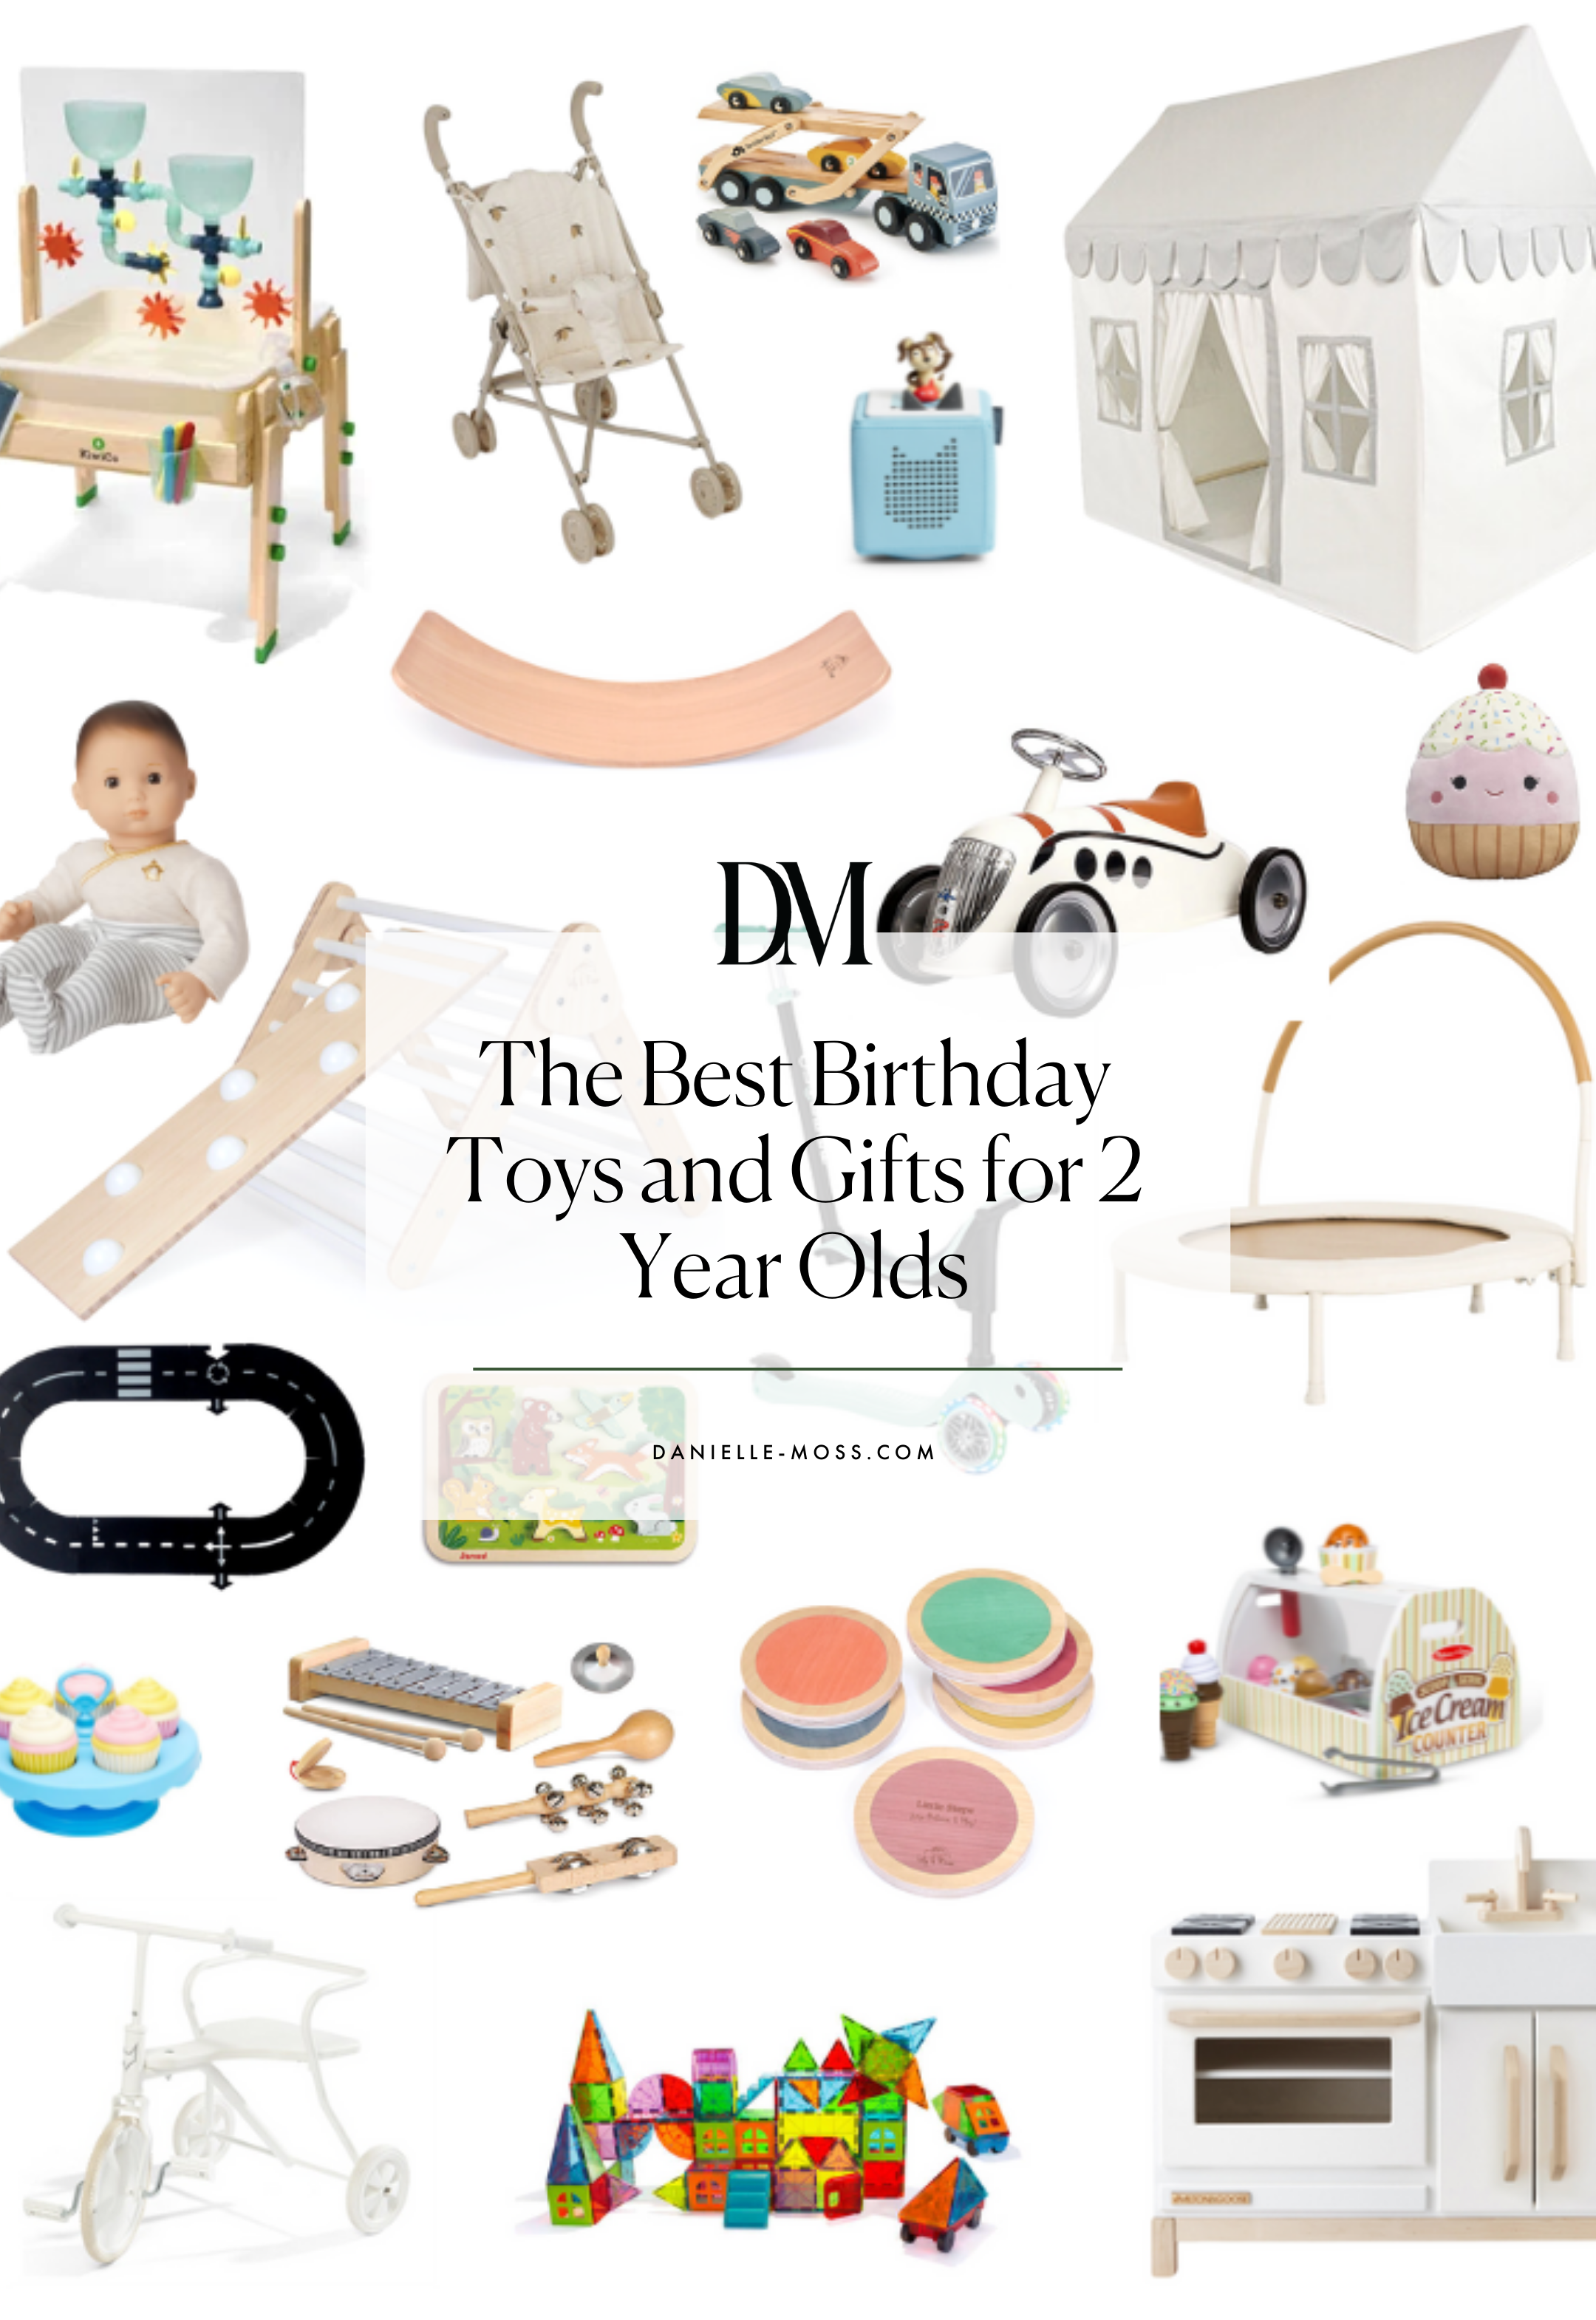 12 Best Gifts For A 2-Year-Old Girl - Sweet Gifts That Parents'll Love